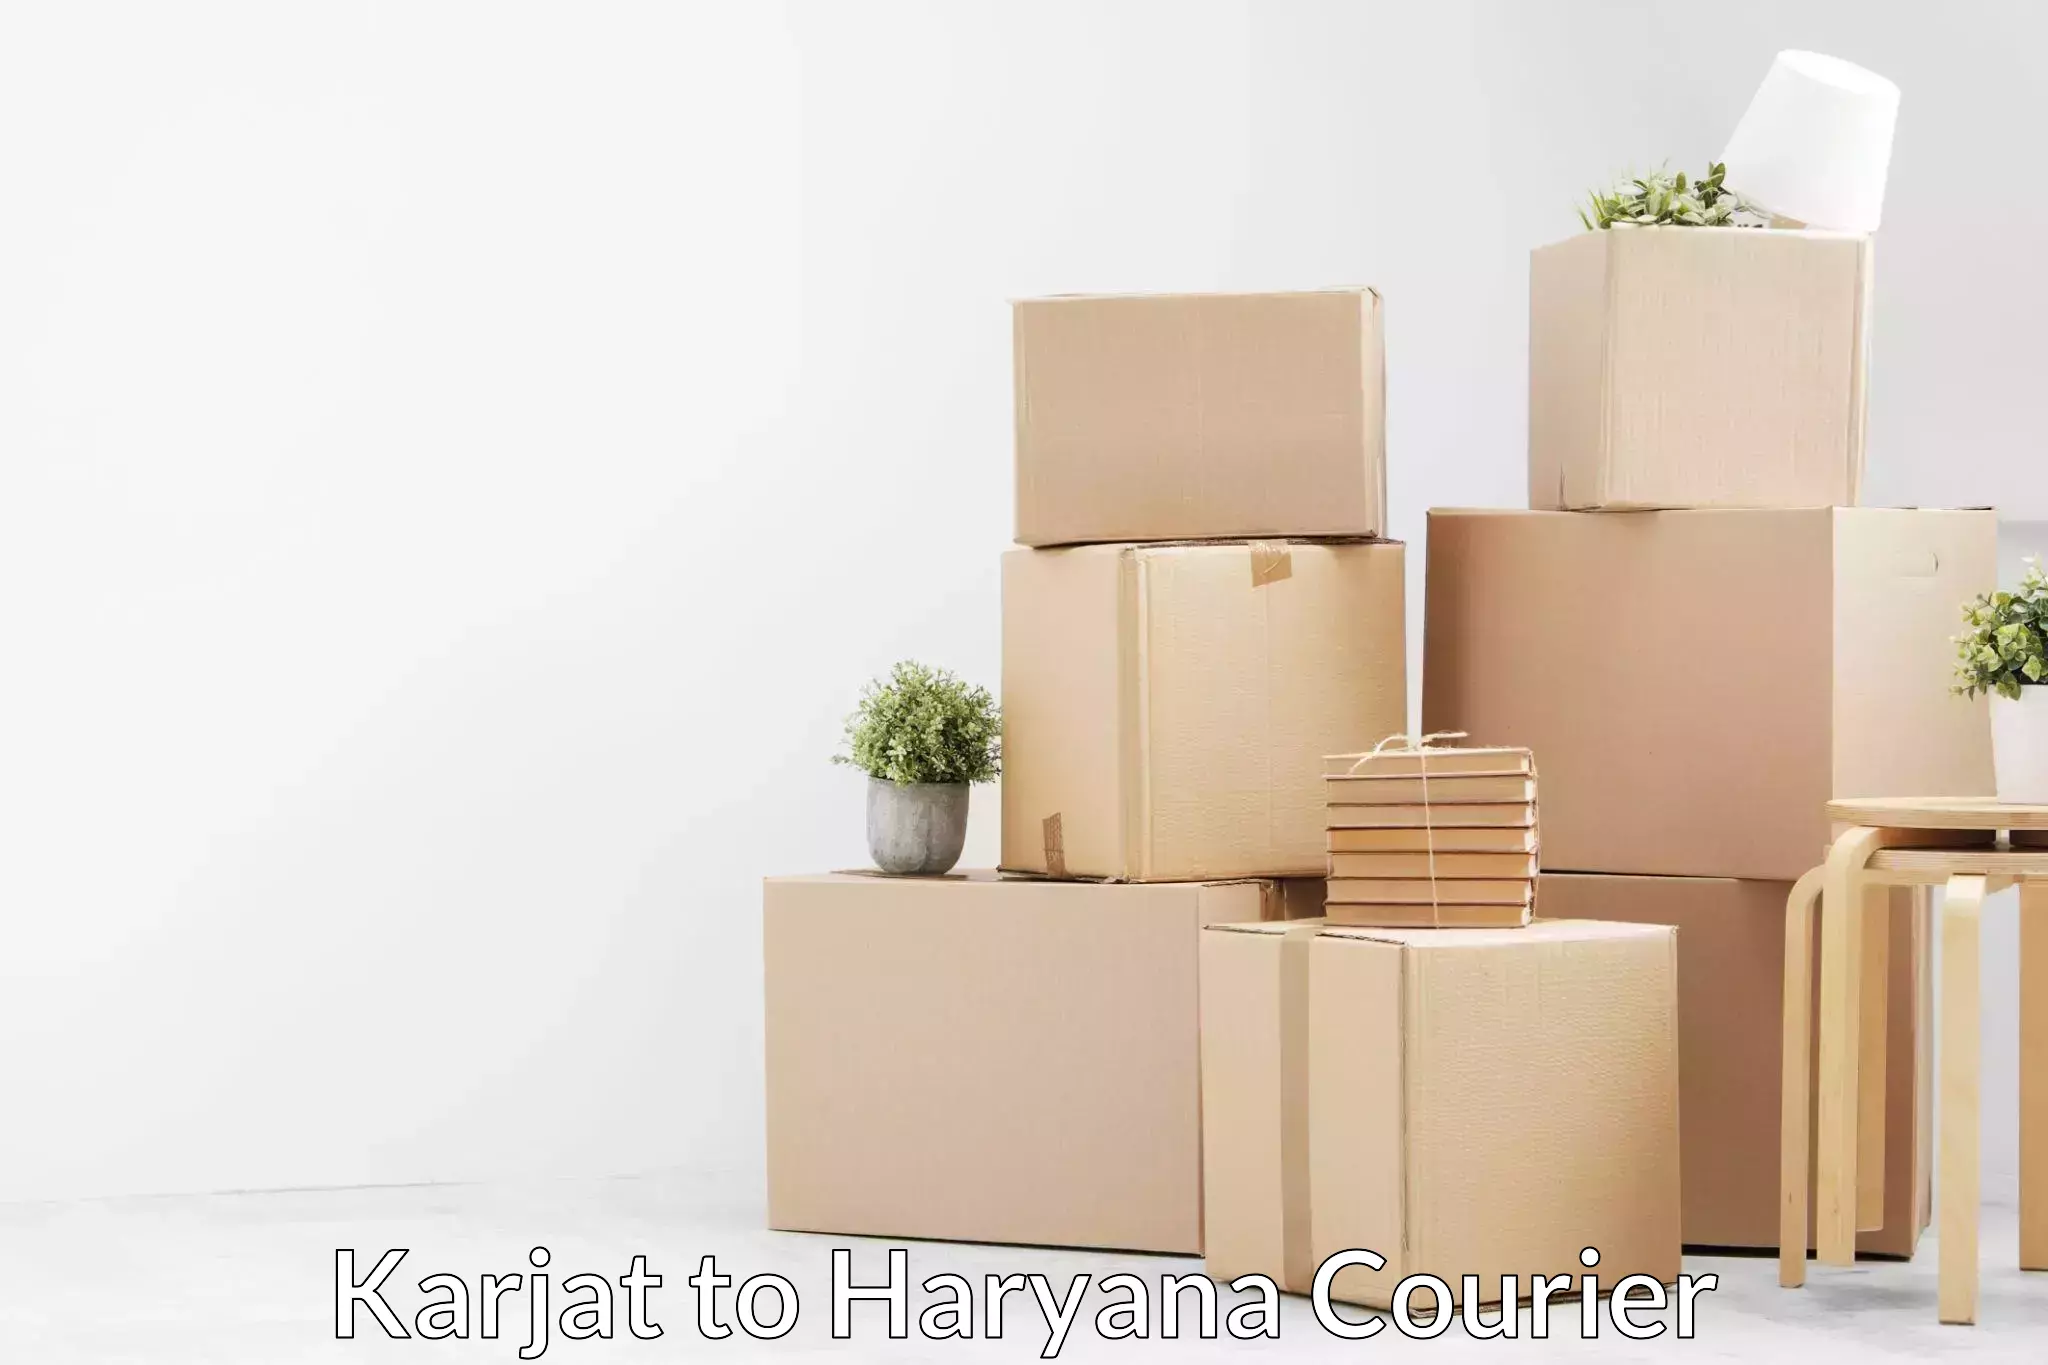 Professional relocation services Karjat to Charkhari